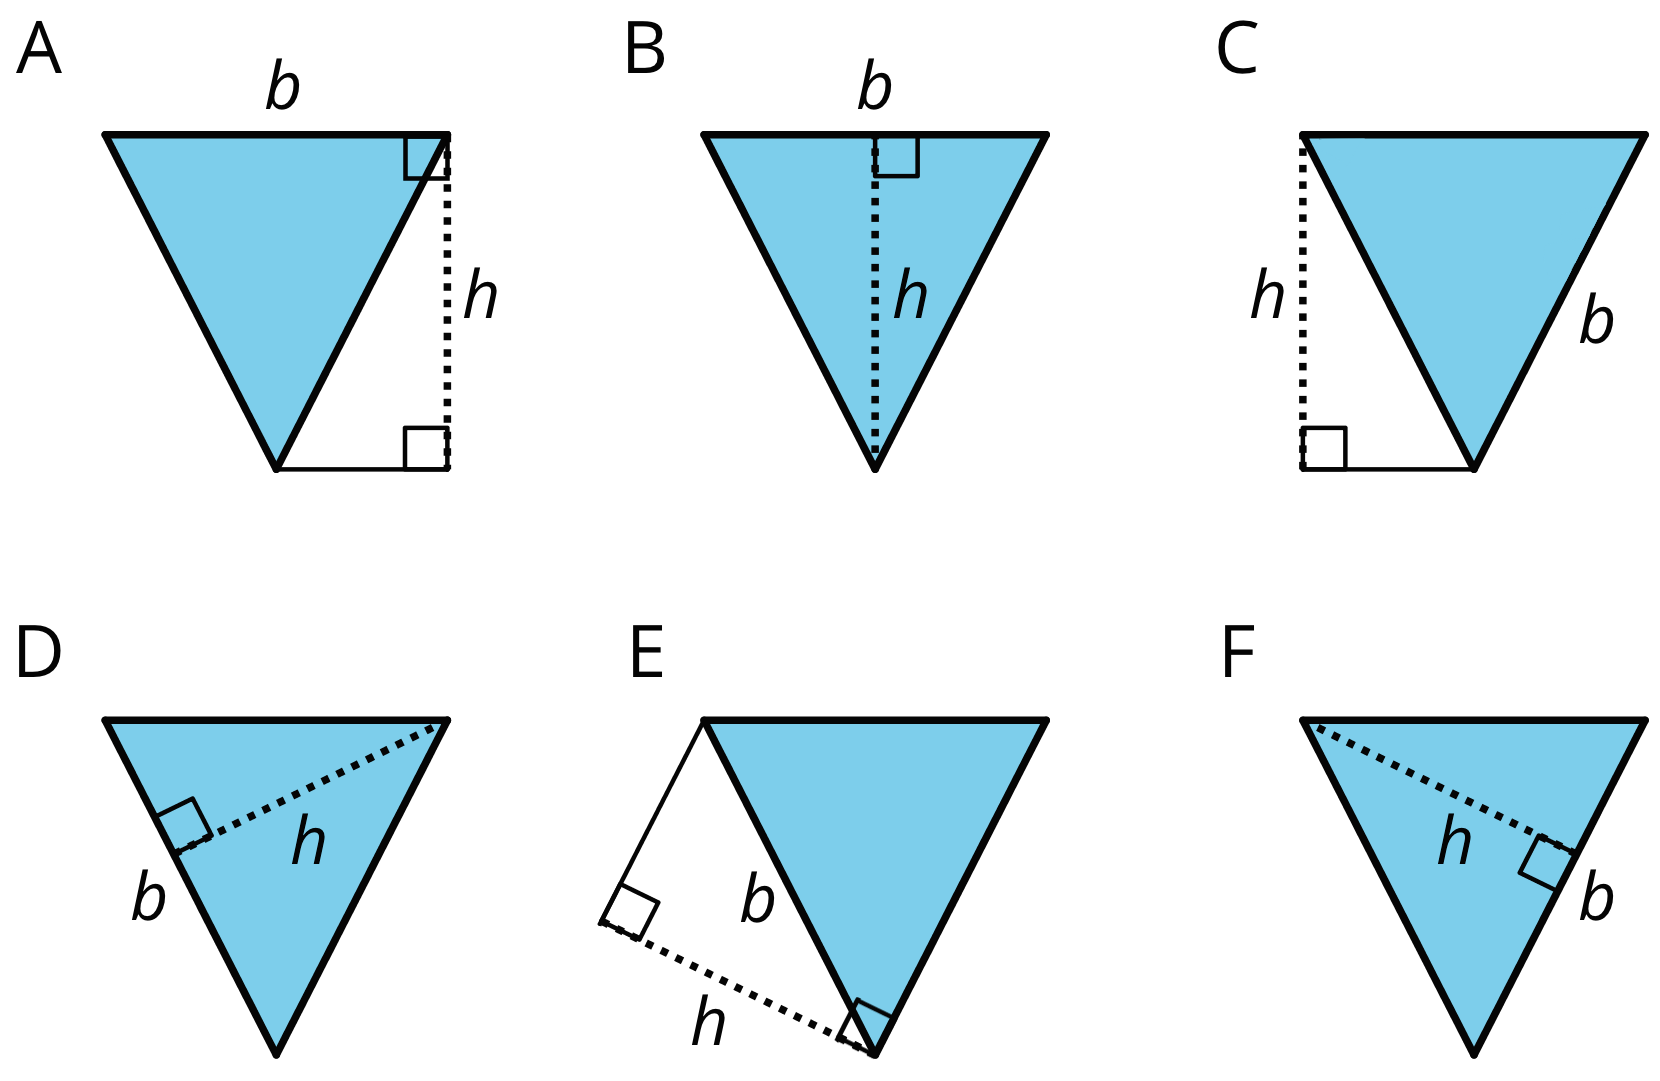 Six images of the same triangle, labeled A, B, C, D, E, and F. On triangle A, the top side is labeled “b” and a dashed line extending straight down from the right vertex islabeled “h”. On triangle B the top side is labeled “b” and a dashed line extends from the center of the top side to the opposite vertex labeled “h”. On triangle C, the right side is labeled “b” and a dashed line extends from the right top vertex straight down to the level of the bottom vertex. On triangle D the left side is labeled “b” and a perpendicular line labeled “h” extends to the opposite vertex. On triangle E, the right side is labeled “b” and a dashed line labeled “h” extends out from the bottom vertex at a right angle to the left side. On triangle F, the right side is labeled “b” and a perpendicular dashed line labeled “h” extends from the side labeled “b” and extends to the opposite vertex.